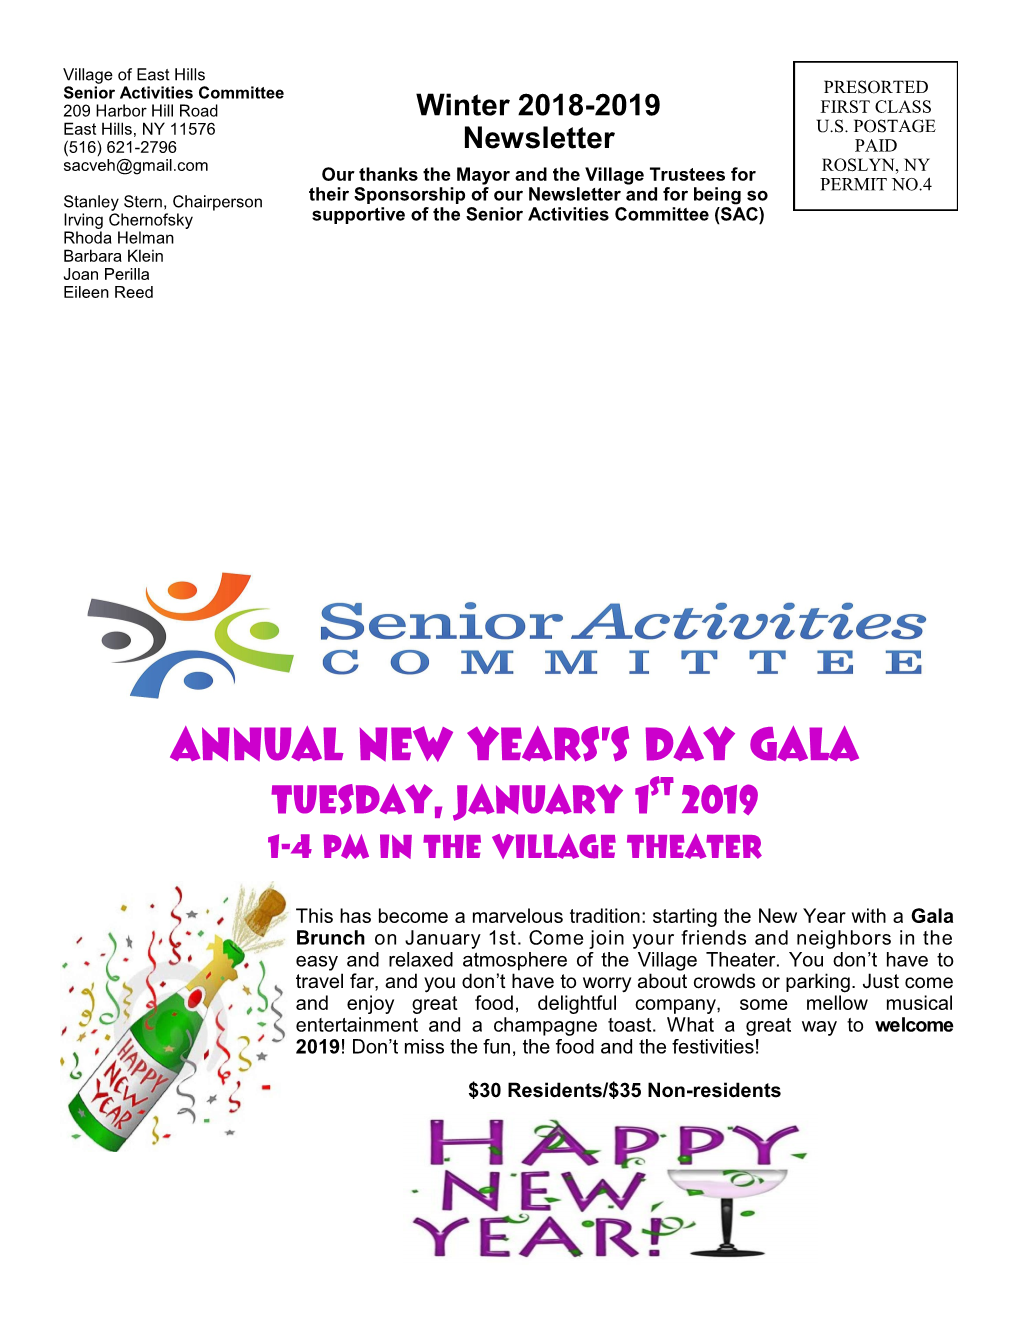 Annual New Years's Day Gala